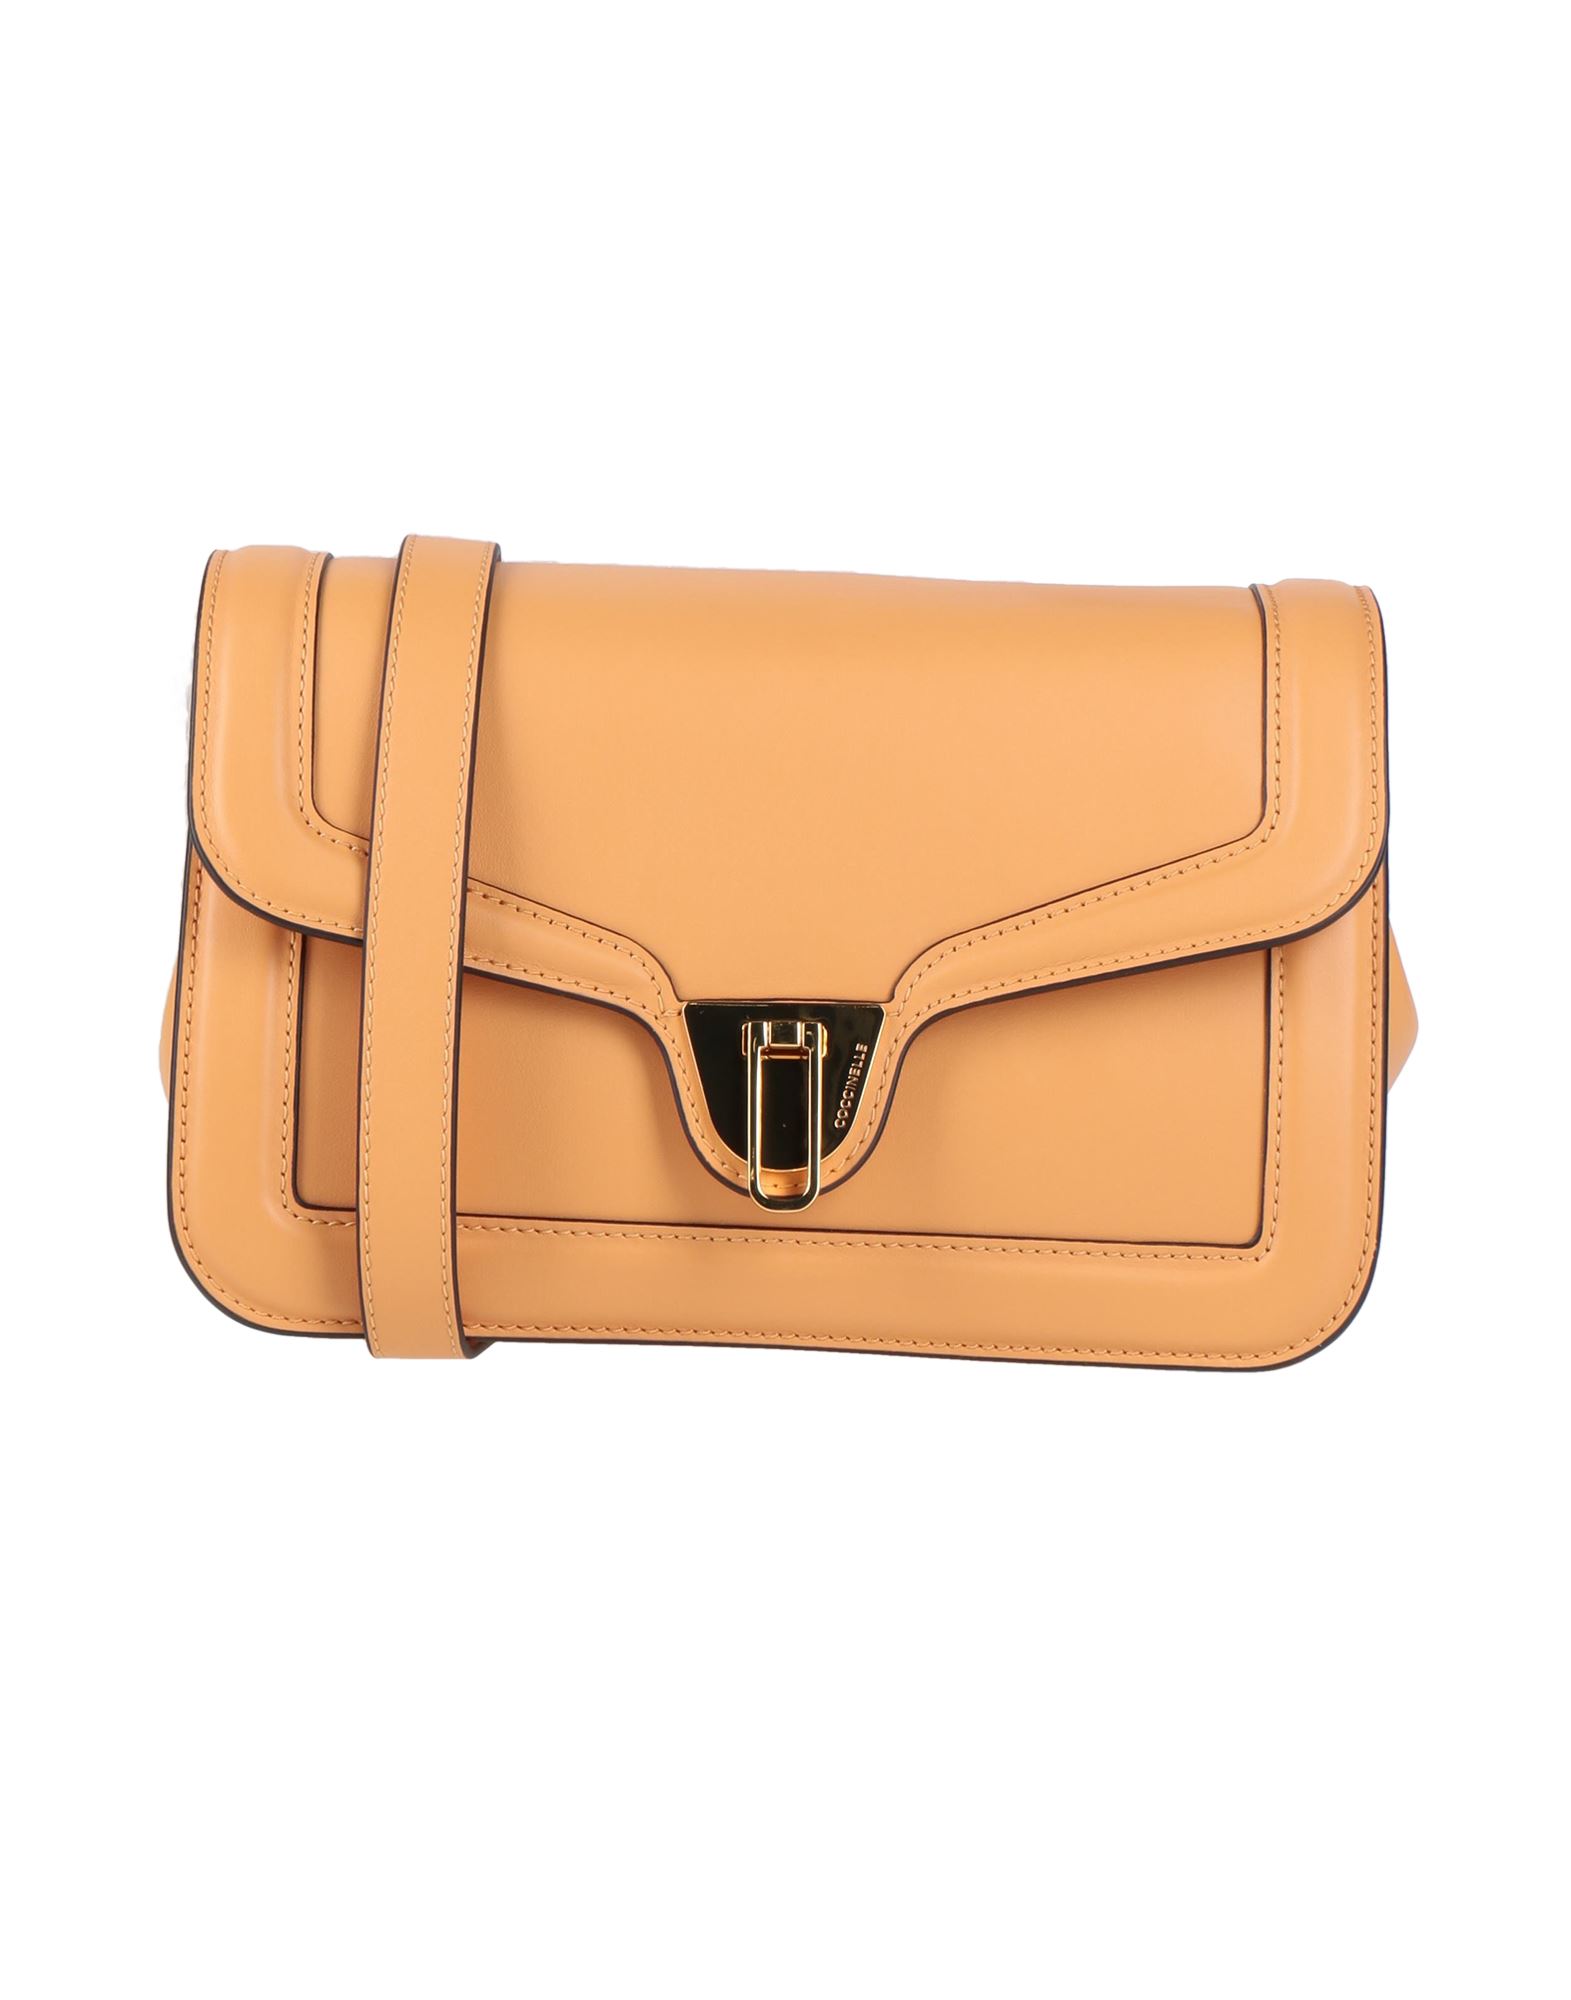 Coccinelle Handbags In Apricot